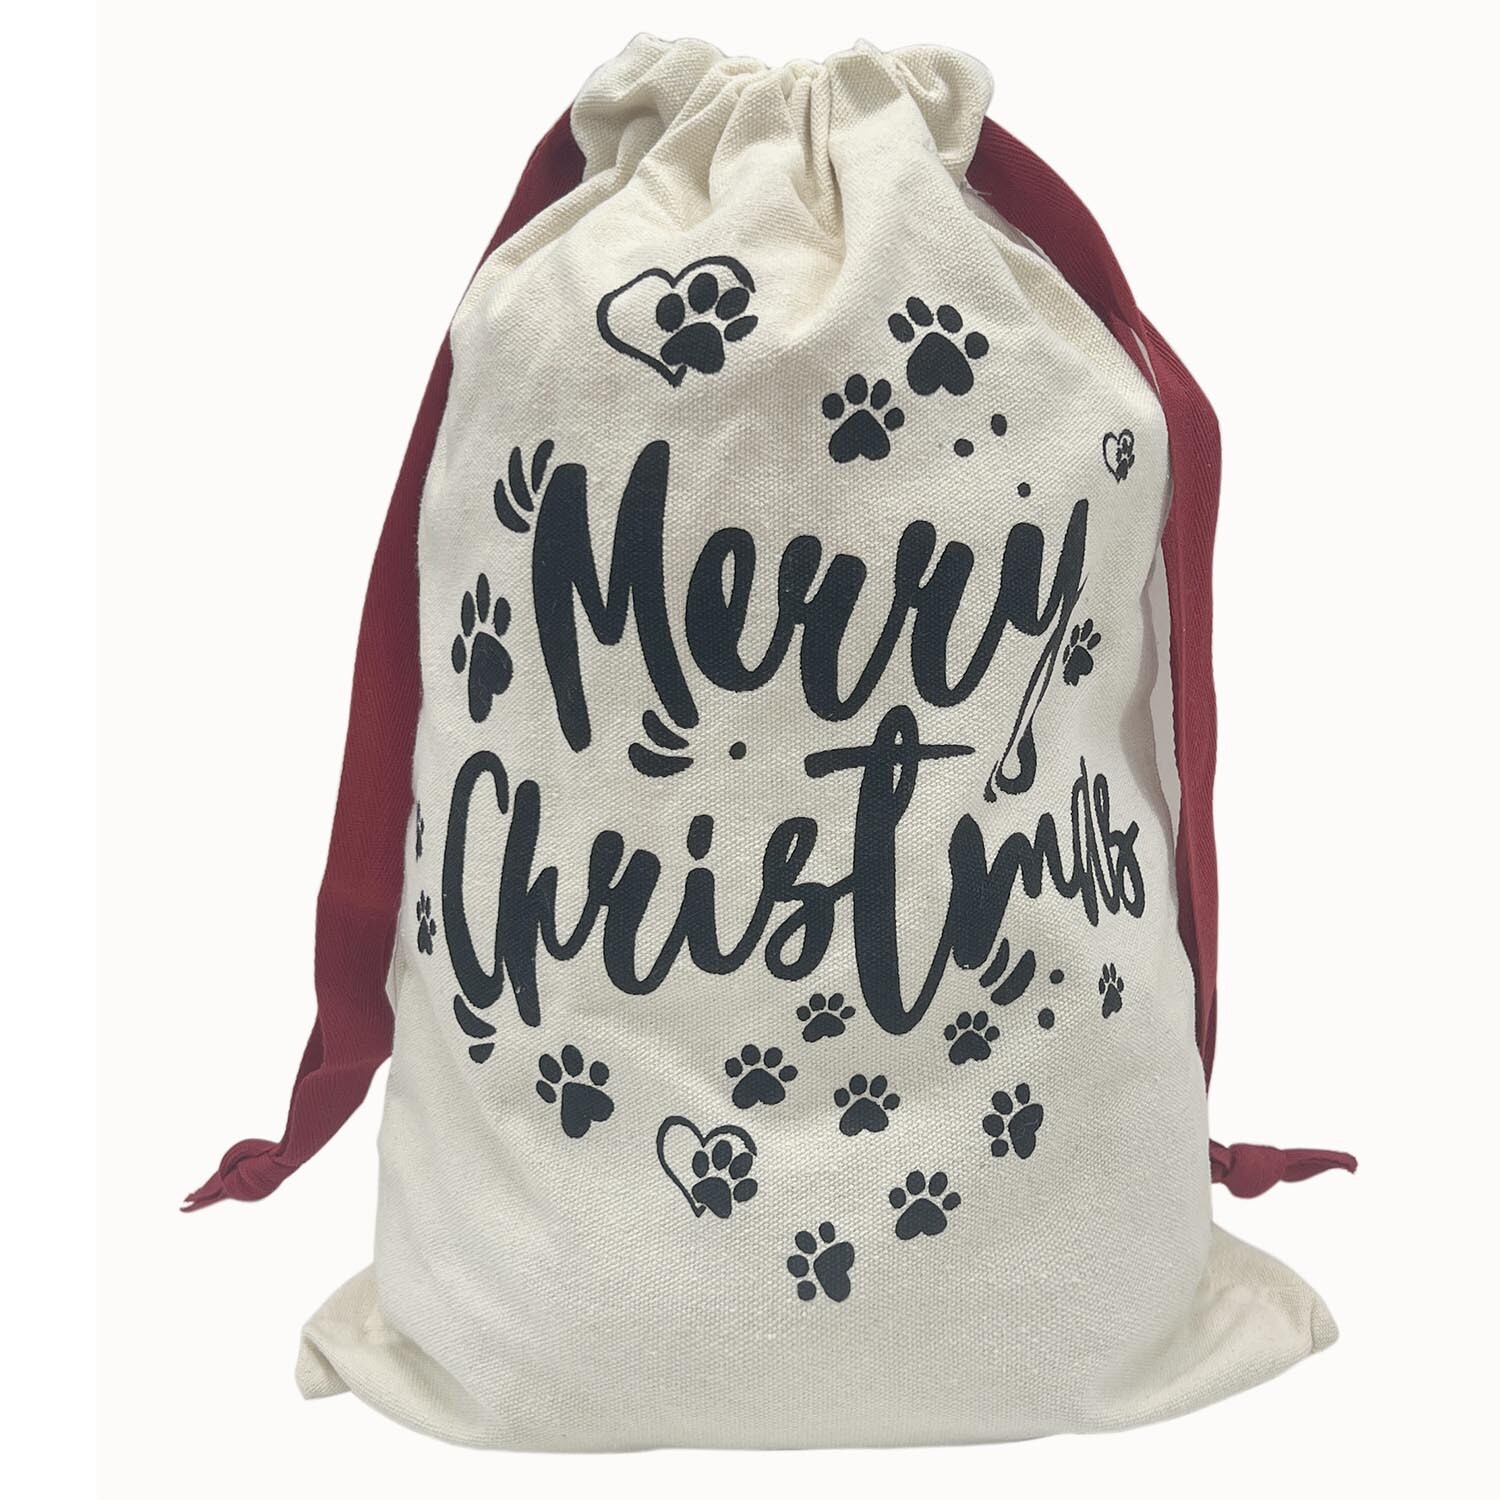 Clever Paws Pet Christmas Sack Image 2